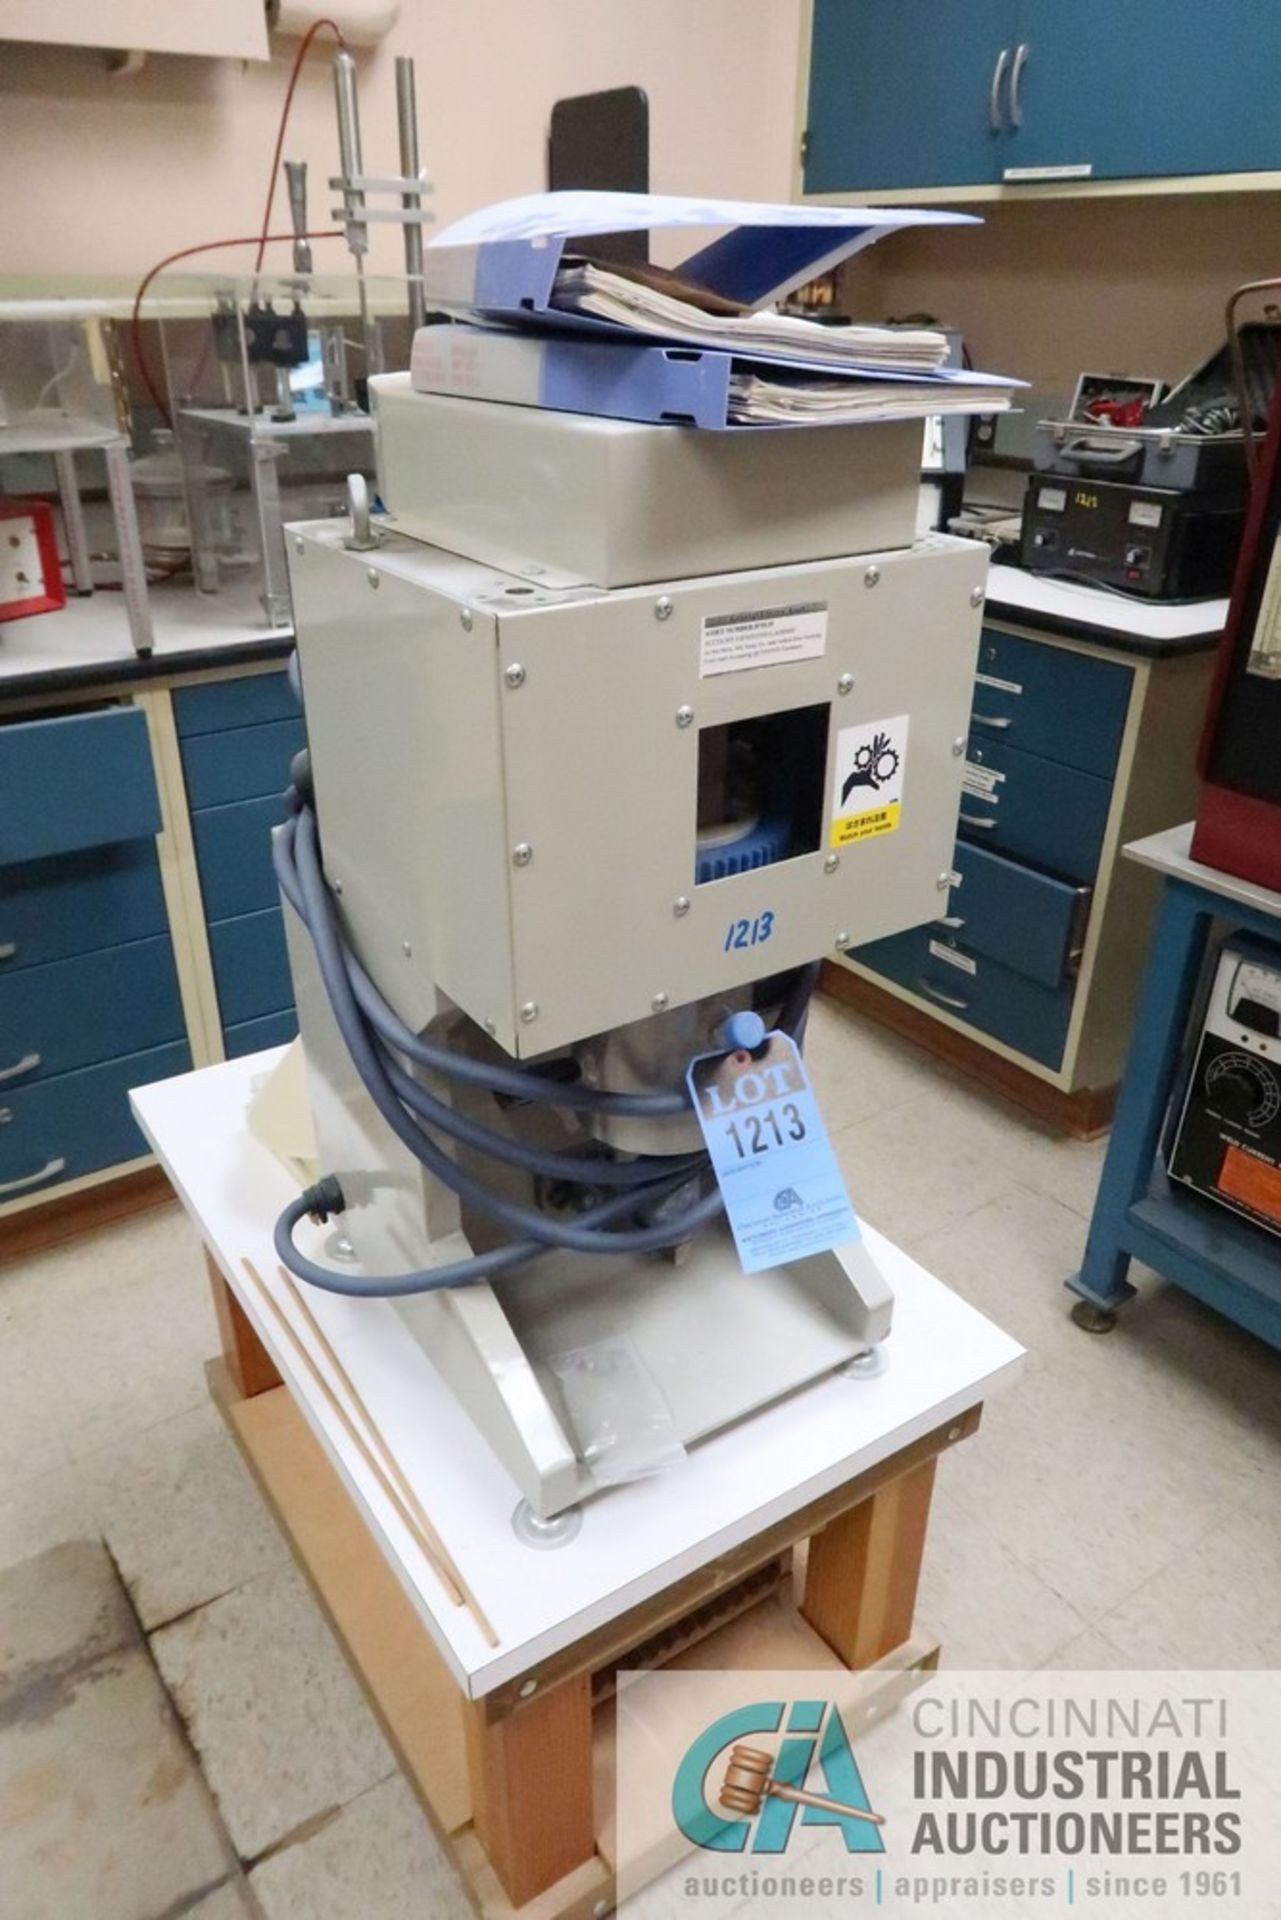 MIYAZAKI MODEL MHS-80 HIGH SPEED MIXER; S/N 0423 (ROOM 29) - Located in the basement